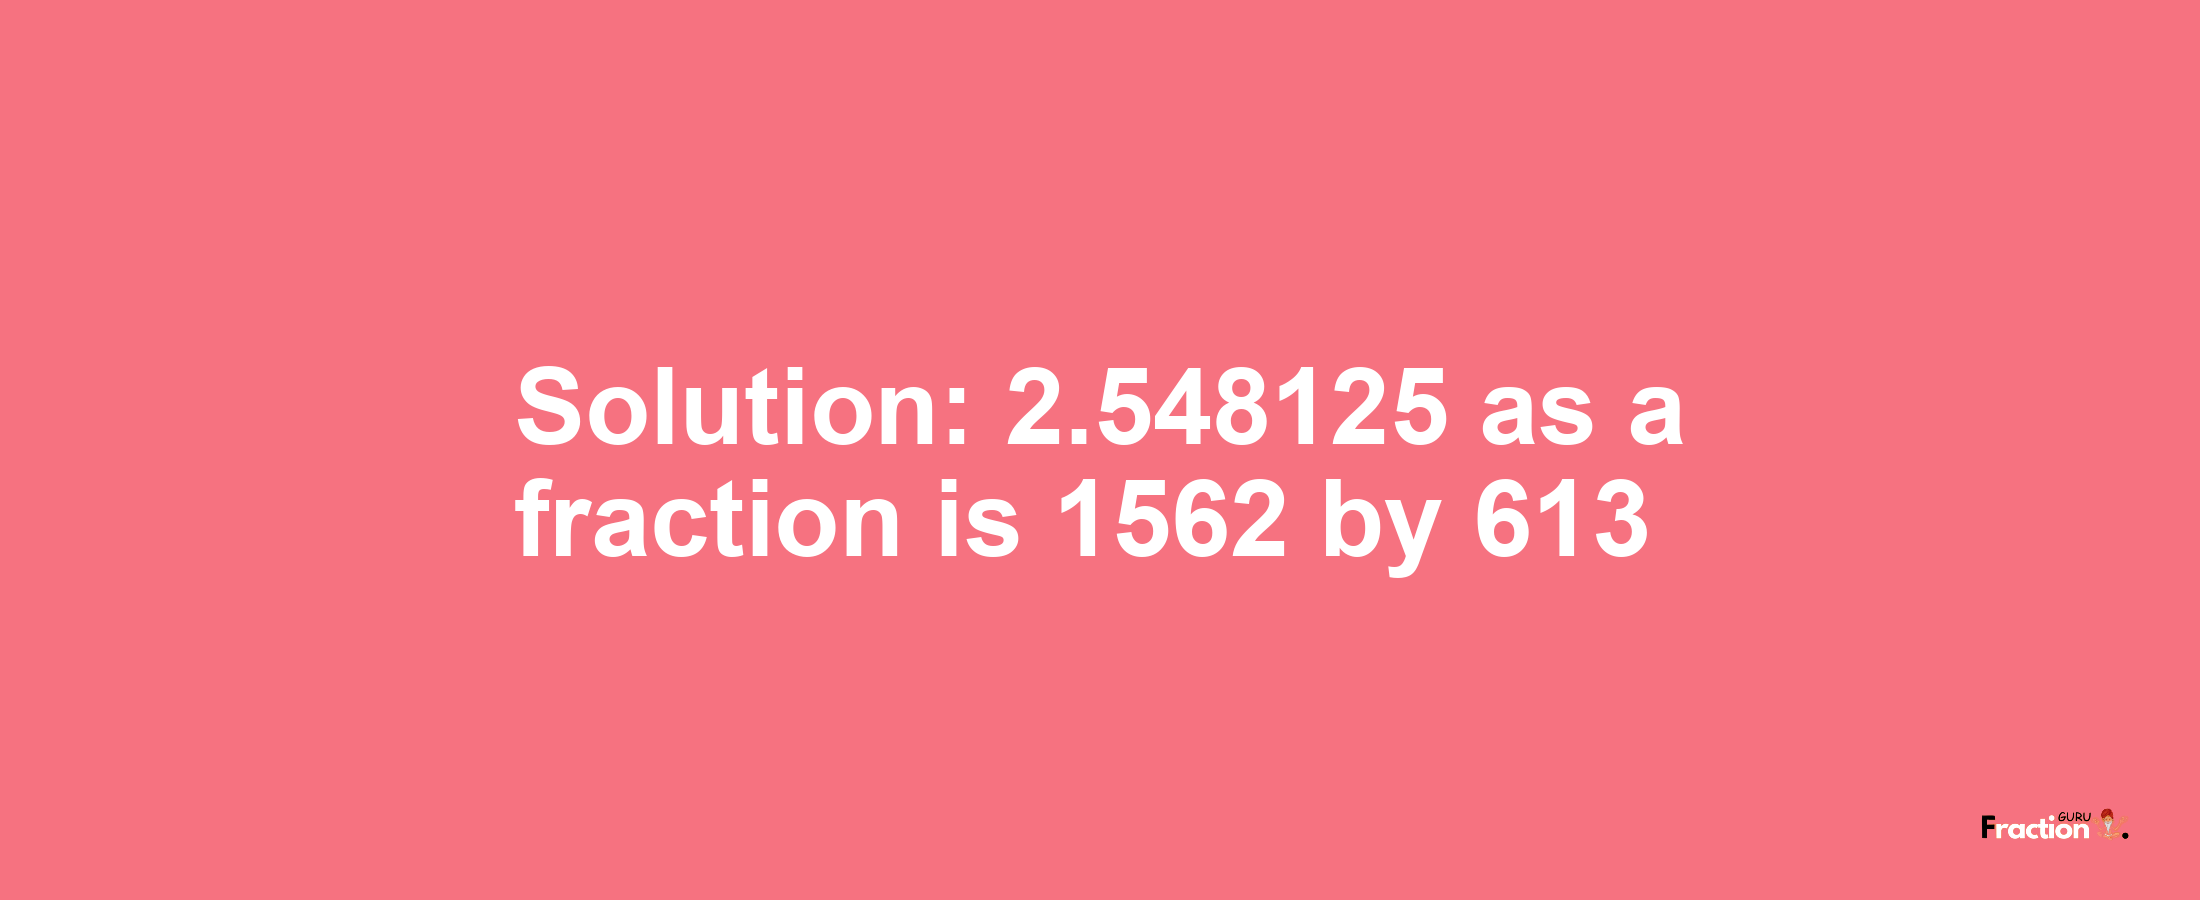 Solution:2.548125 as a fraction is 1562/613